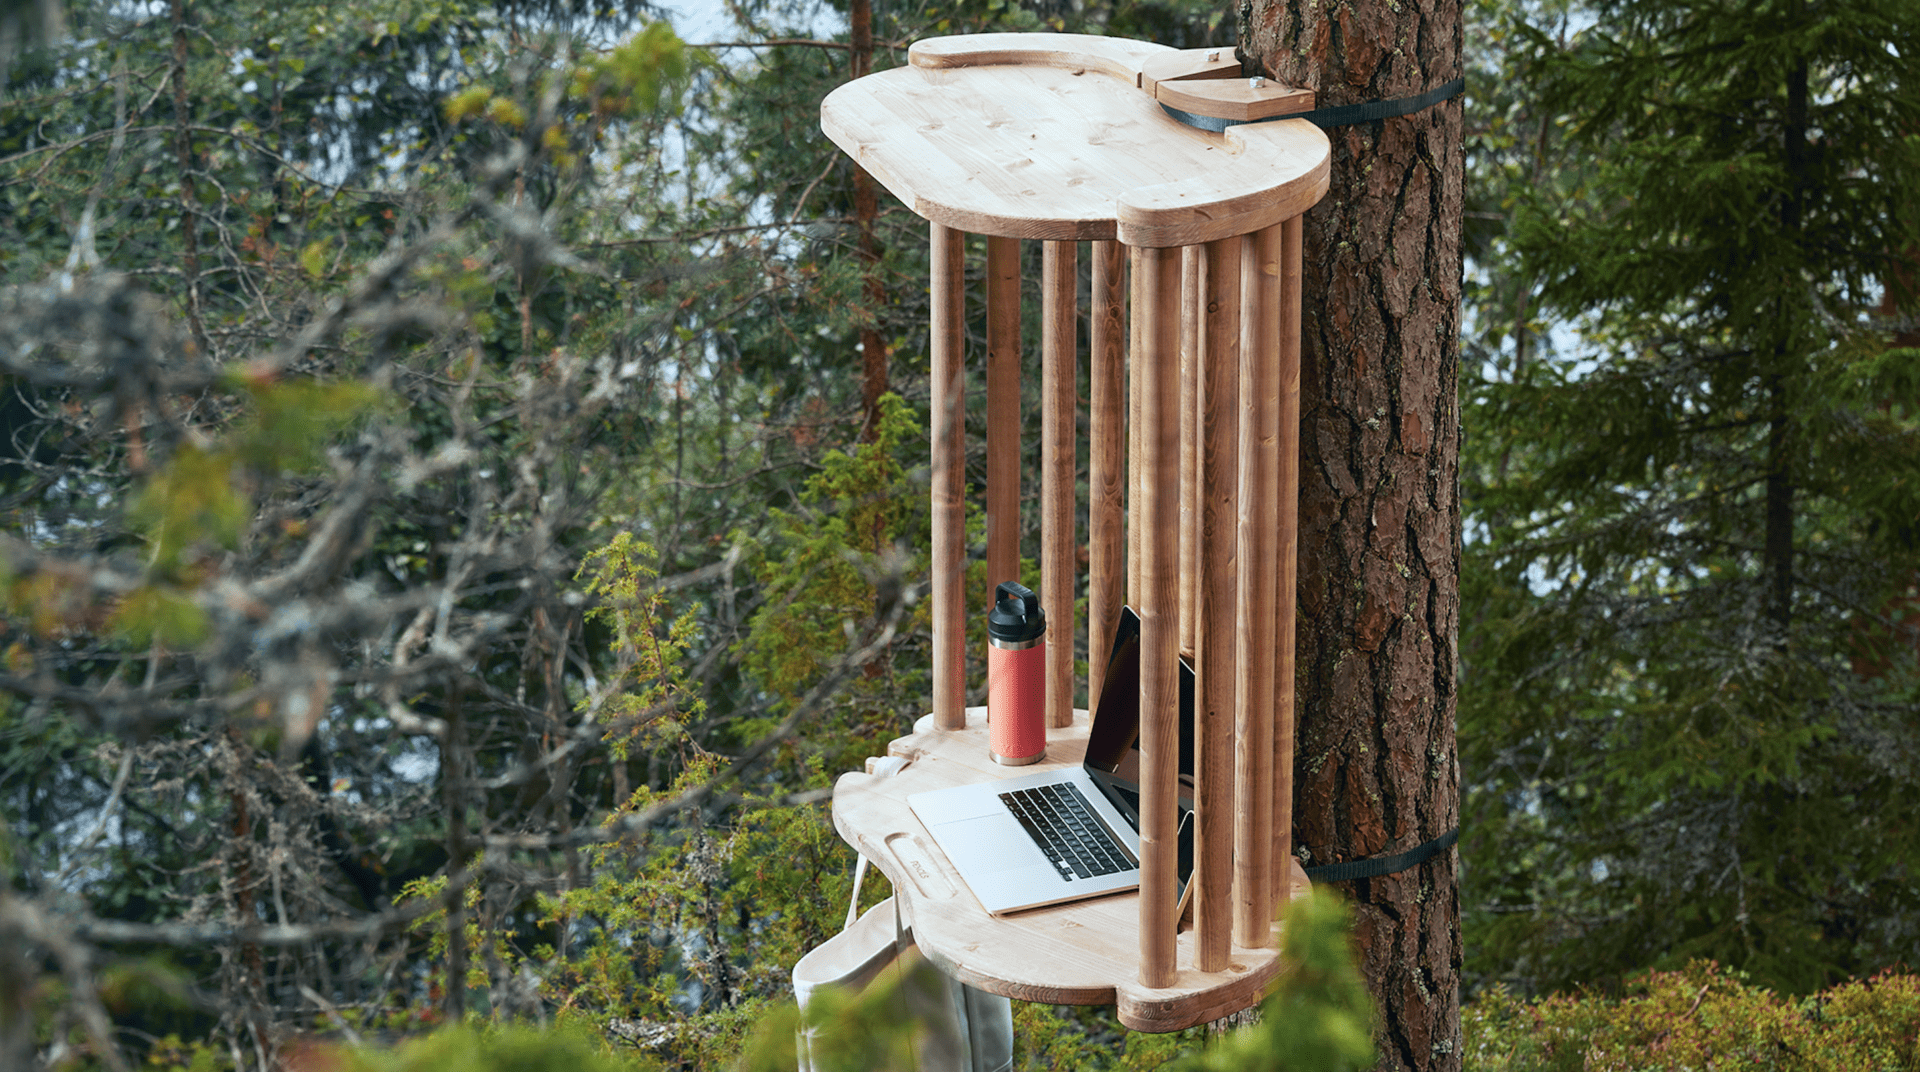 Leading Finnish green city Lahti sets up remote workstations in nature  sites free for everyone to use - OnOffice | Design at Work